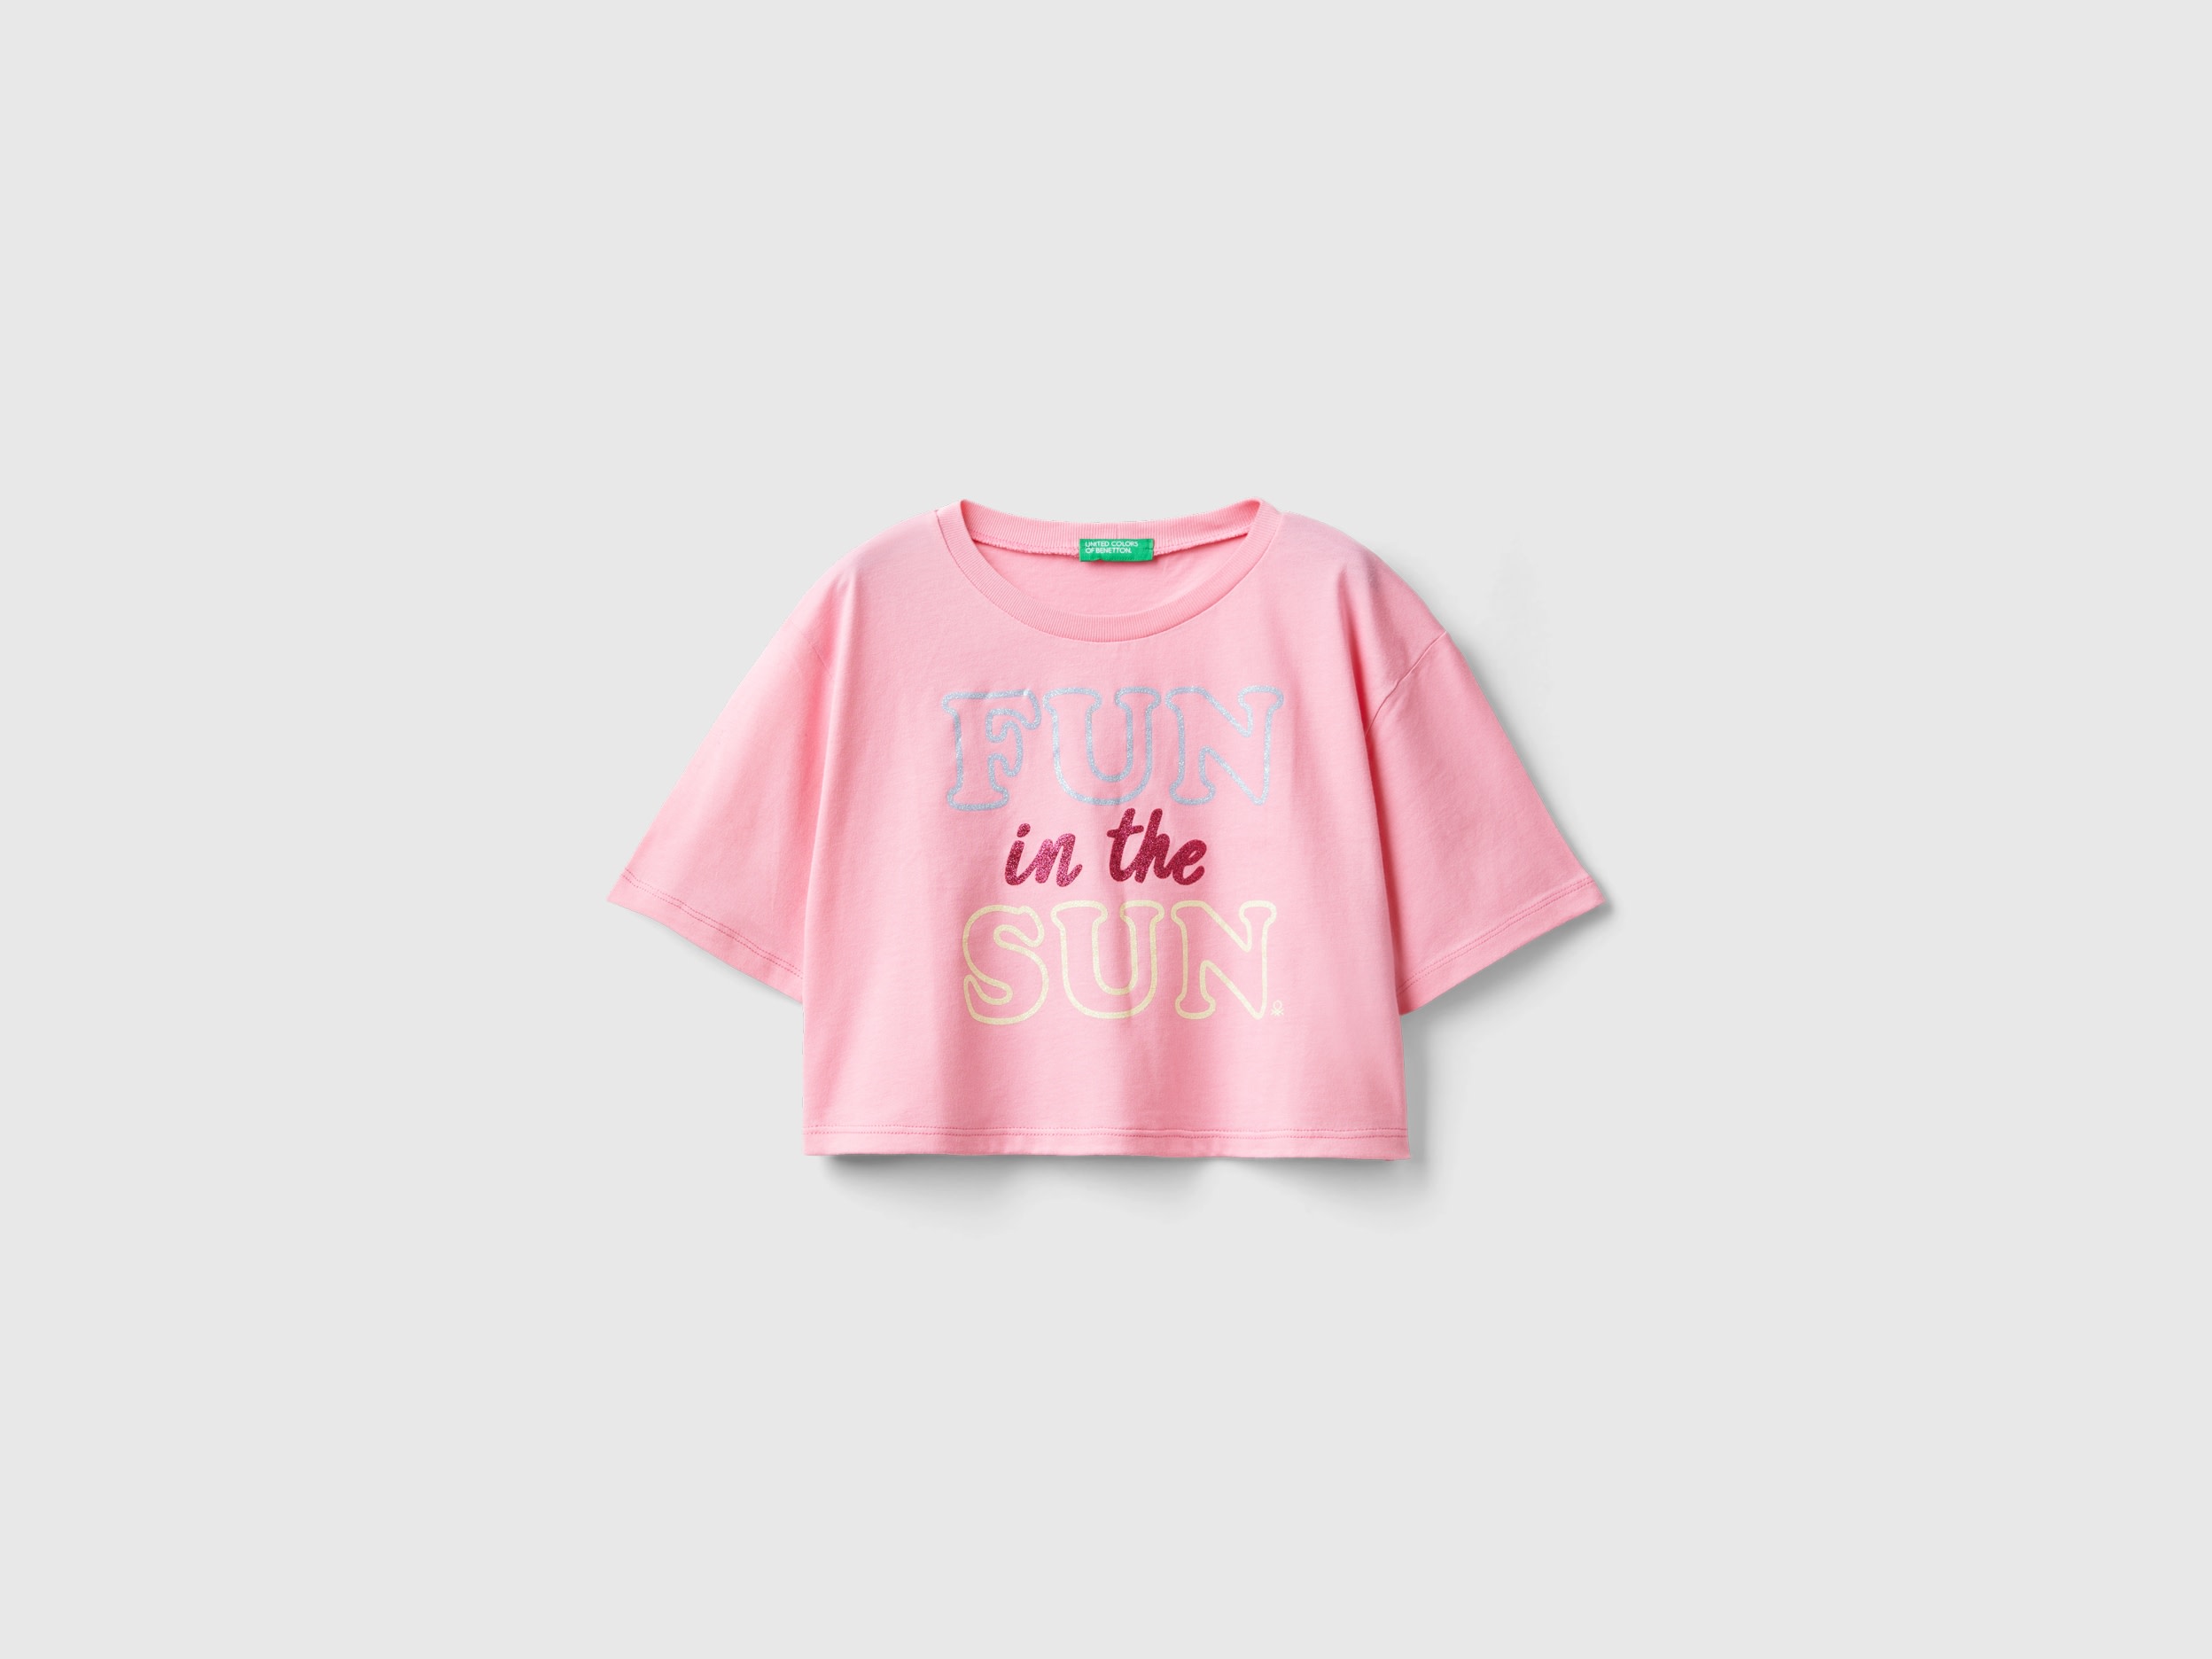 Image of Benetton, T-shirt With Glittery Print, size M, Pink, Kids